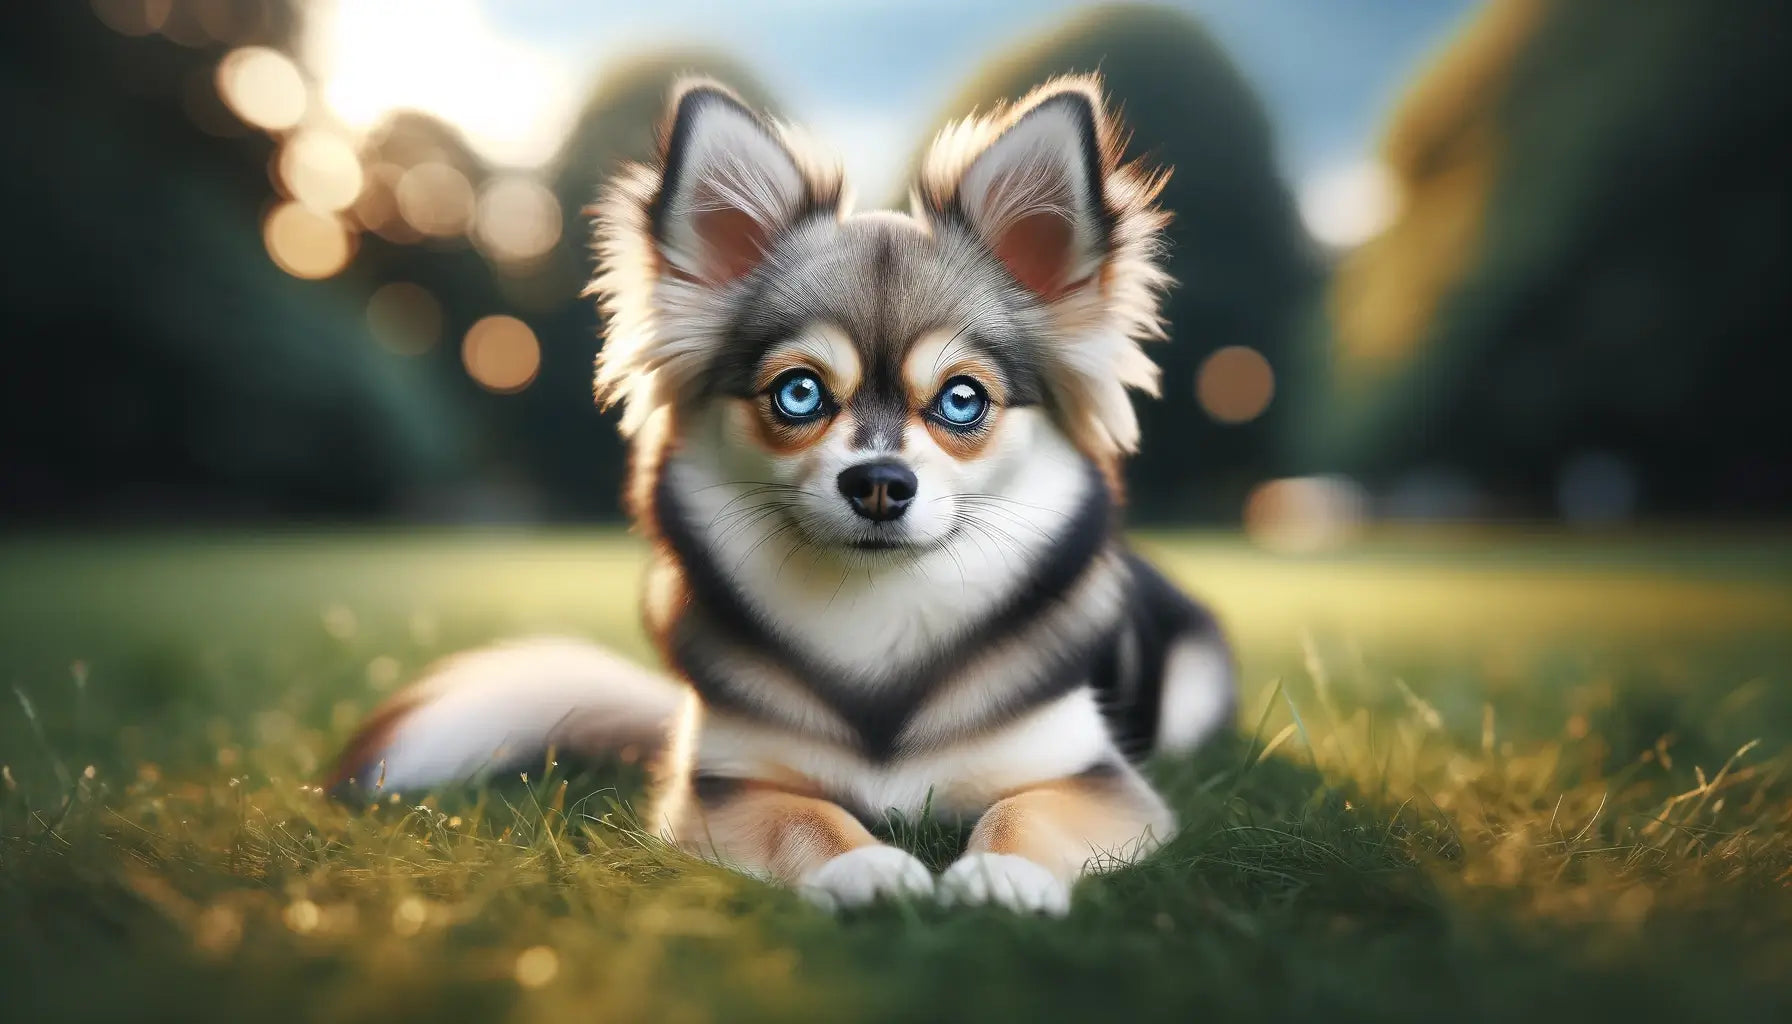 A Chihuahua Husky Mix lying on the grass, showcasing striking blue eyes and thick fur reminiscent of a Husky, combined with the petite frame and alertness of a Chihuahua.